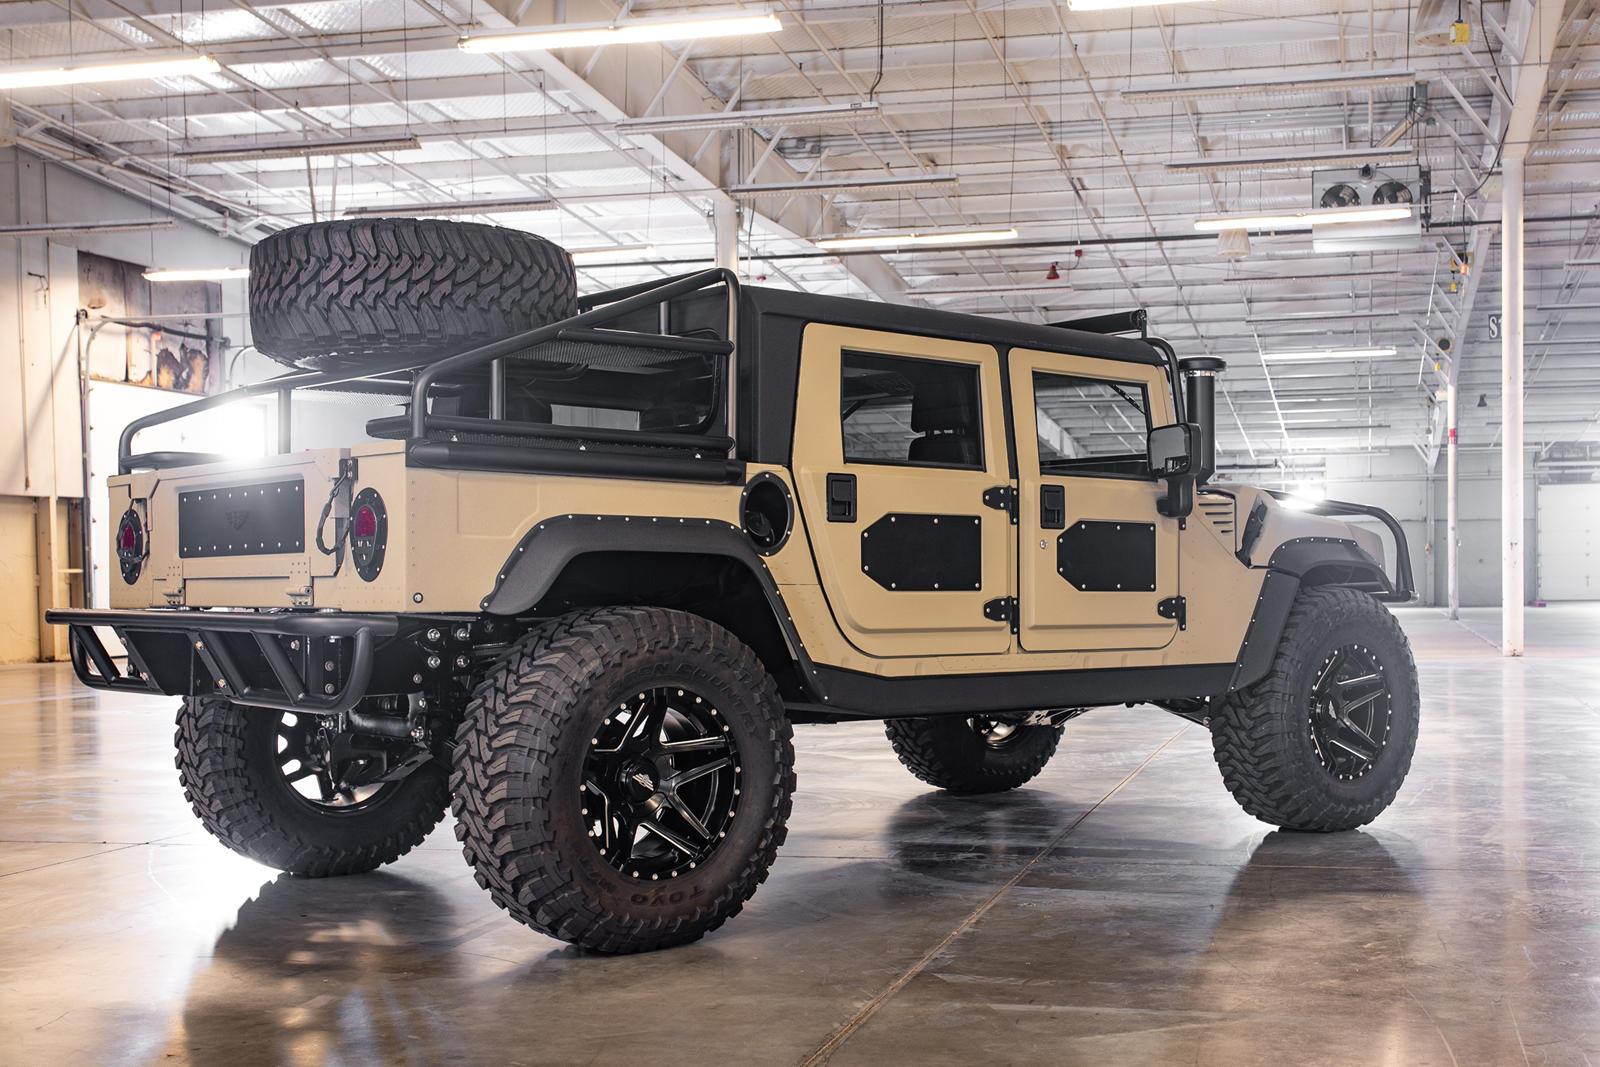 This Baja-Ready Custom-Built Hummer H1 Costs Over $250,000